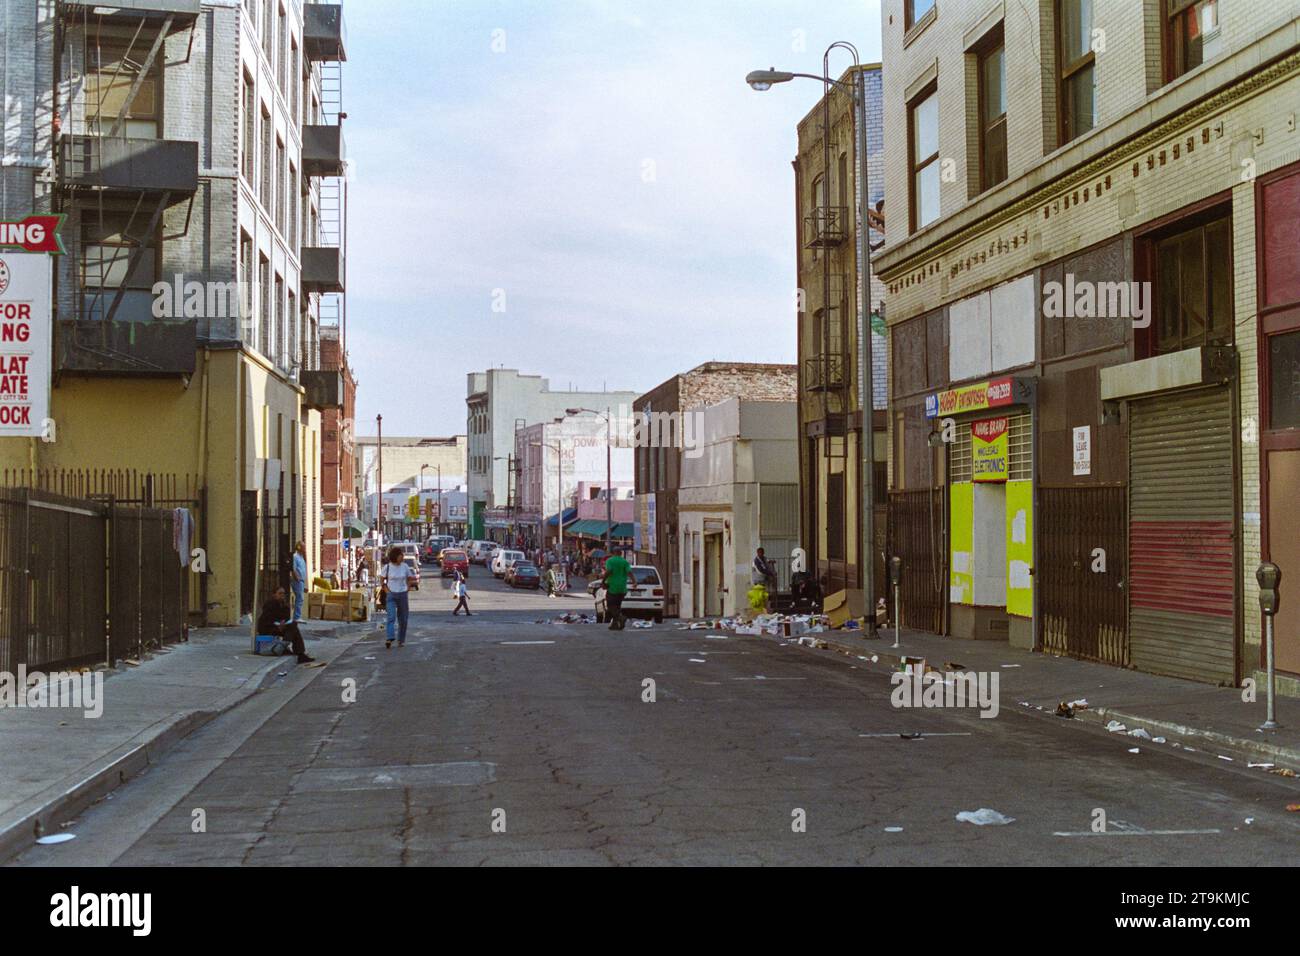 Los Angeles, California USA - October 15, 1998:  Archival editorial view of gritty Winston street in downtown L.A.  Shot on film. Stock Photo